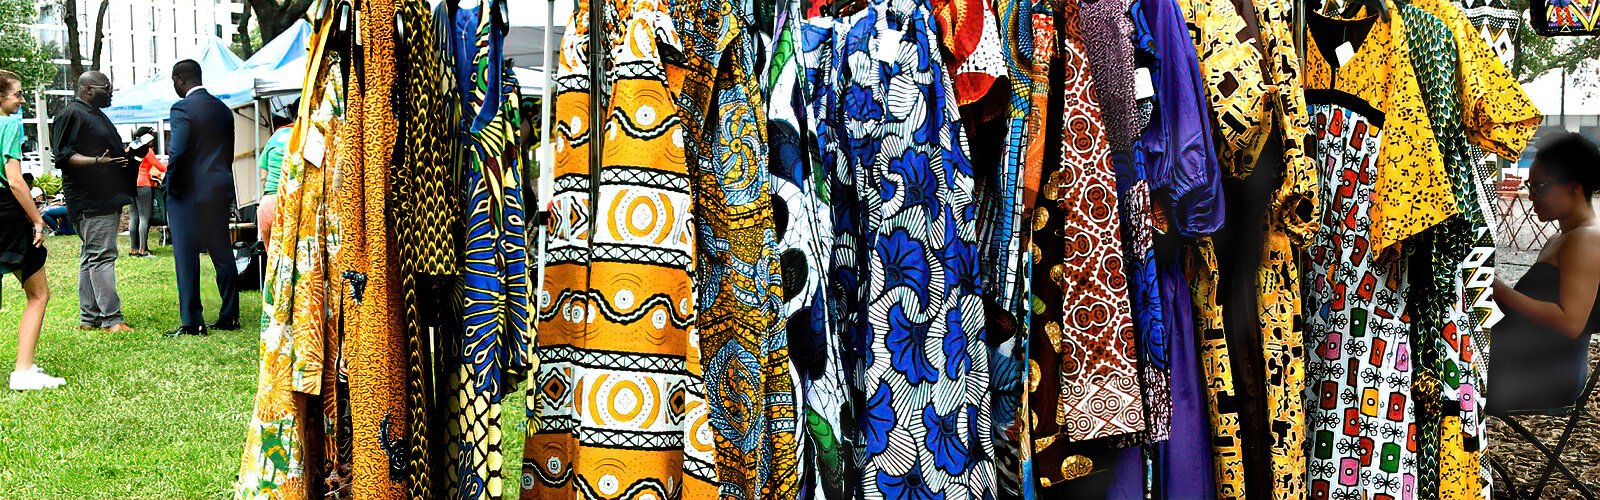 Specializing in handmade African clothing, Elijah Lee displays a wide assortment of her vibrant African prints for sale at the Juneteenth festival  in Lykes Gaslight Park in Tampa.